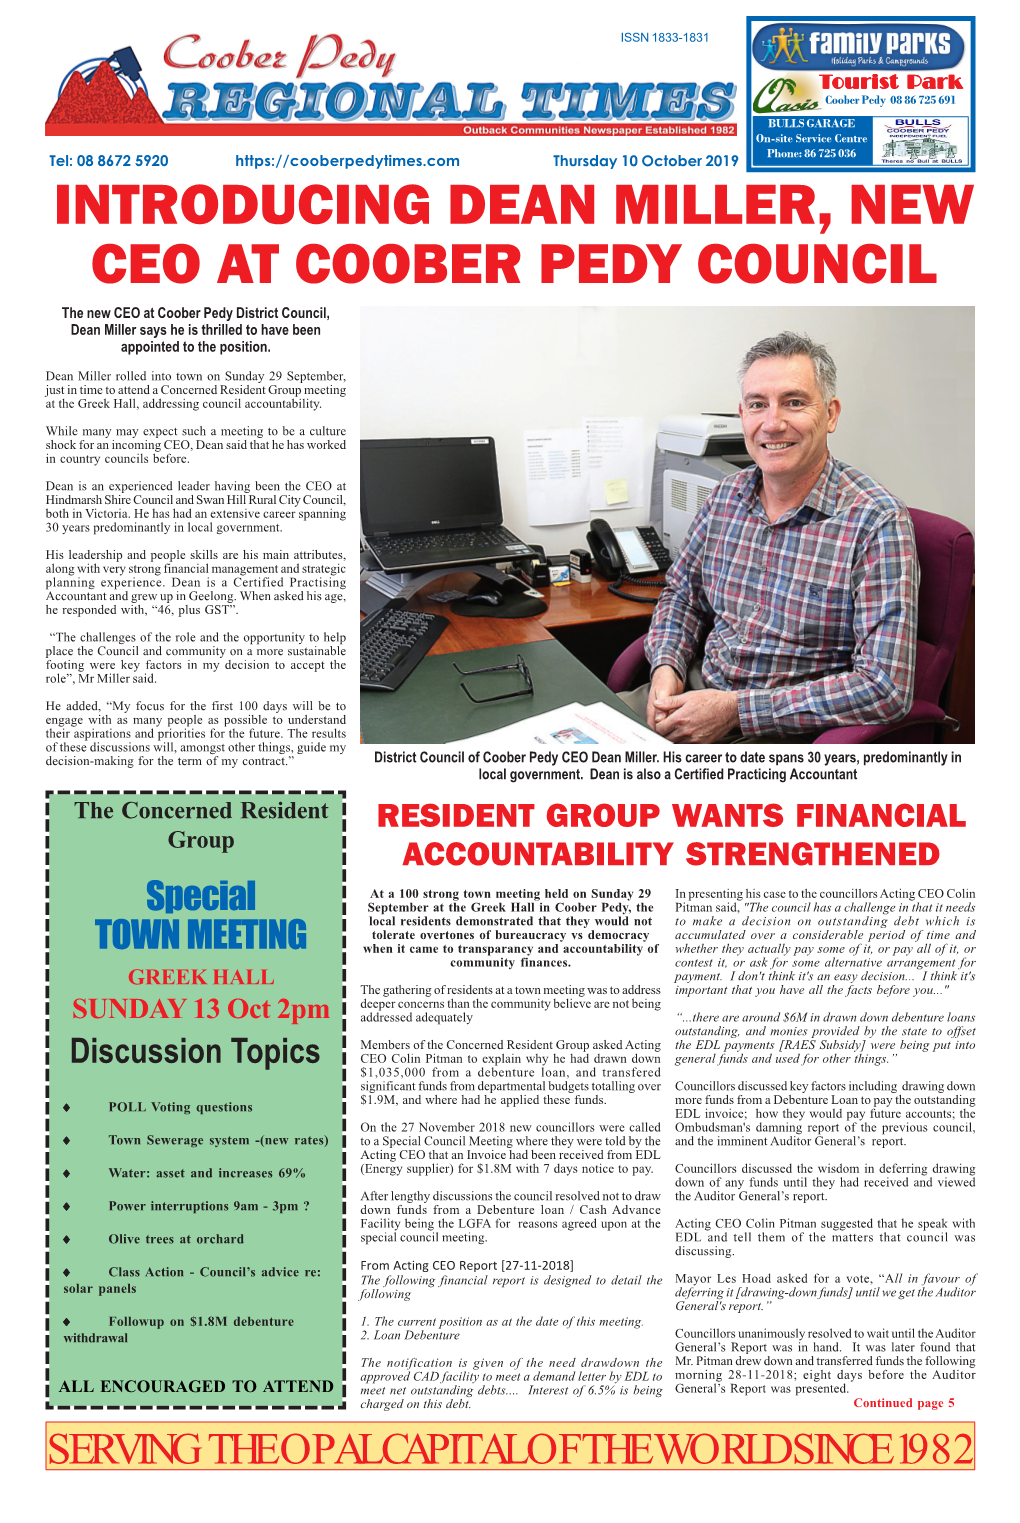 Introducing Dean Miller, New Ceo at Coober Pedy Council